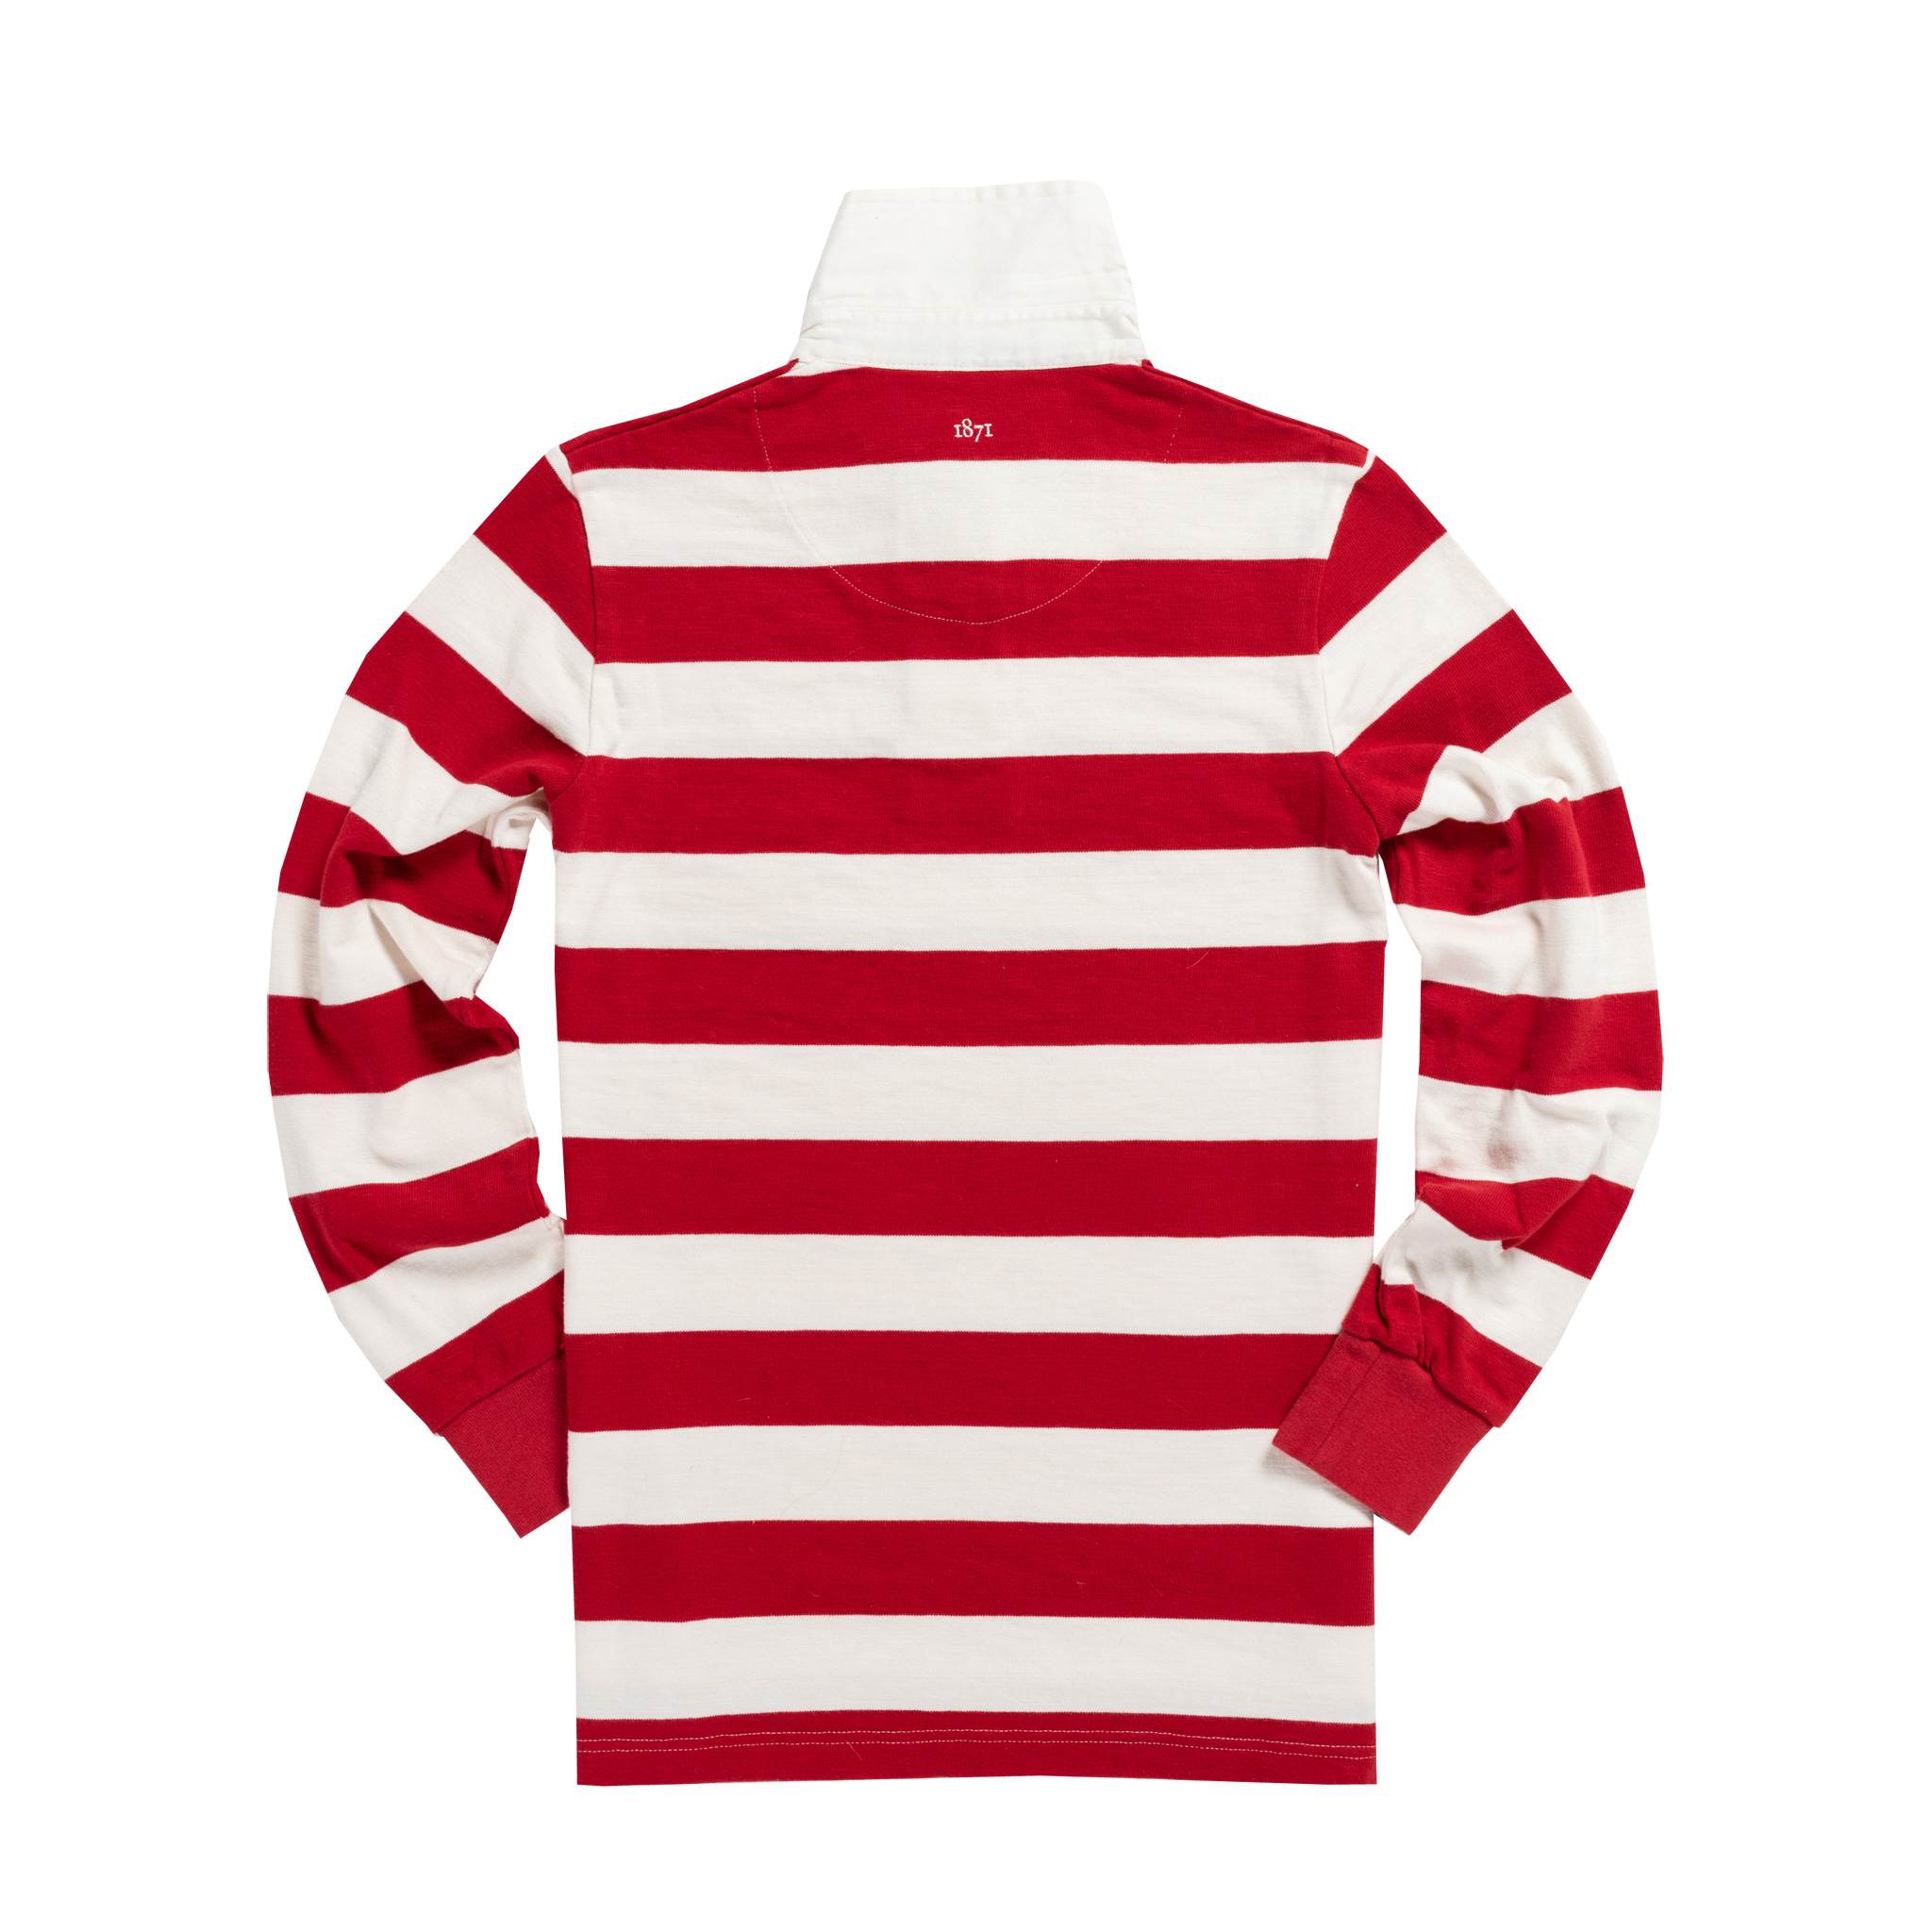 Women's Classic Red and White 1871 Vintage Rugby Shirt